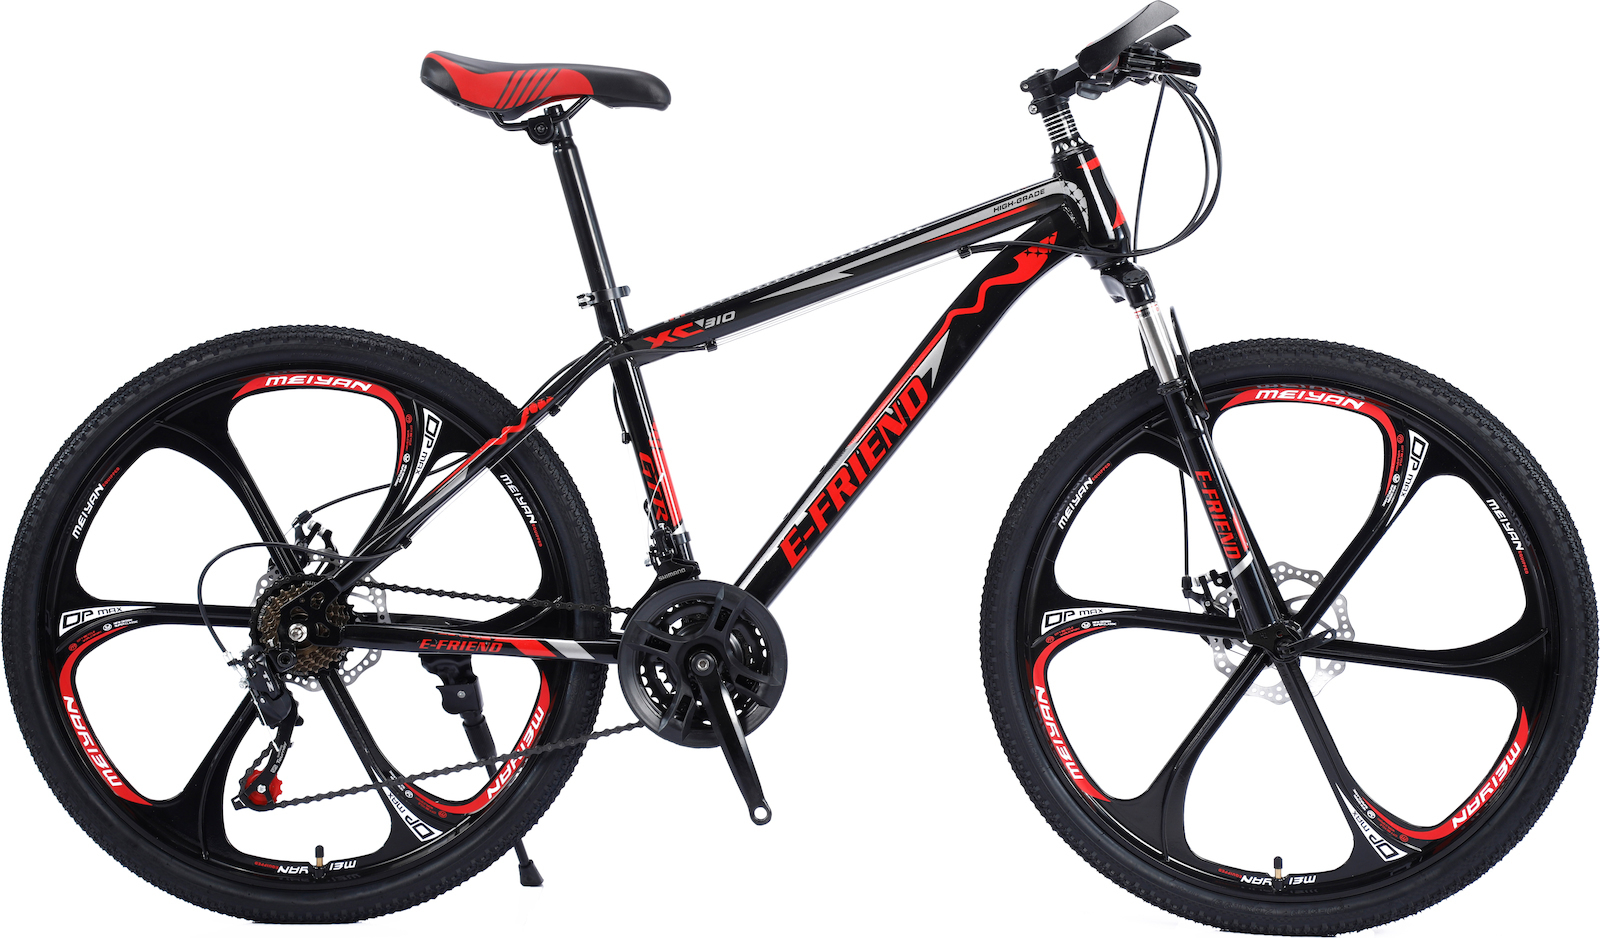 26 in. Black Mountain Bike 21 Speeds with Mechanical Disc Brakes